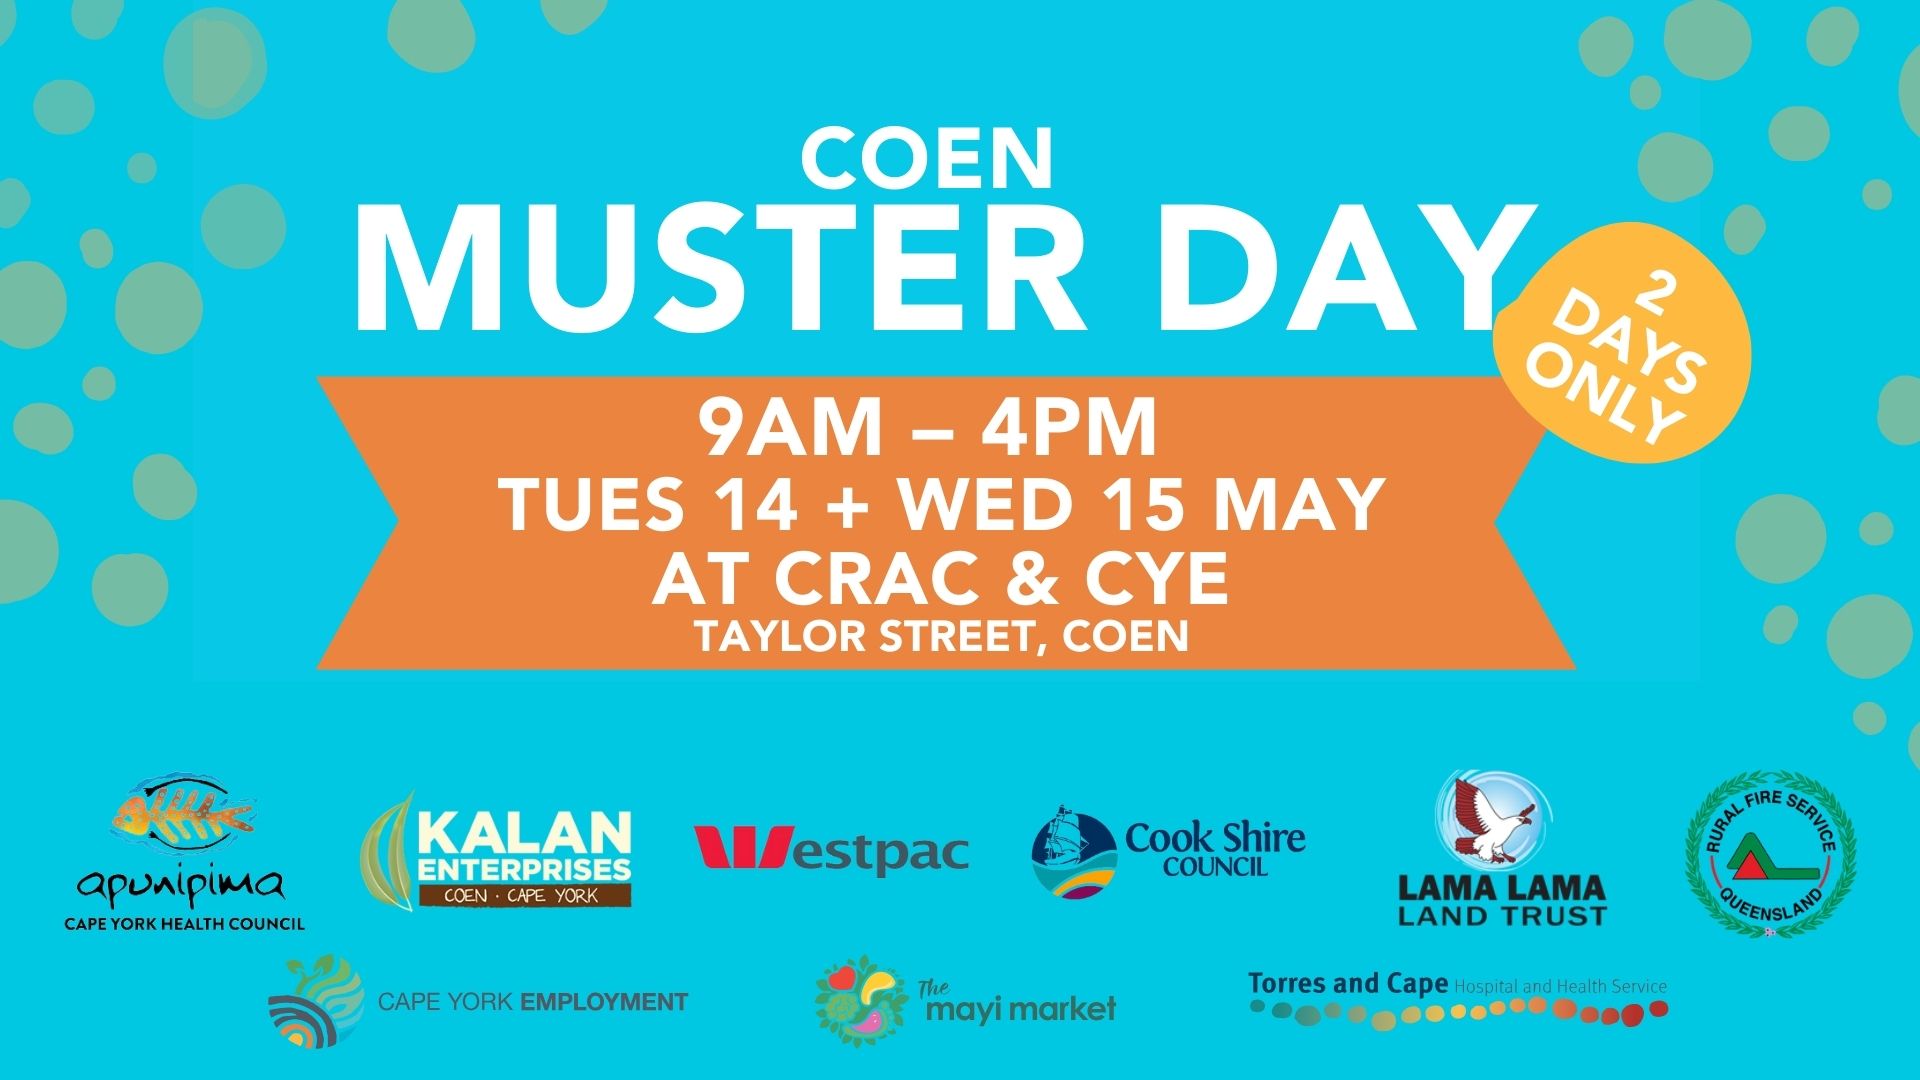 Head to the Coen Muster Day